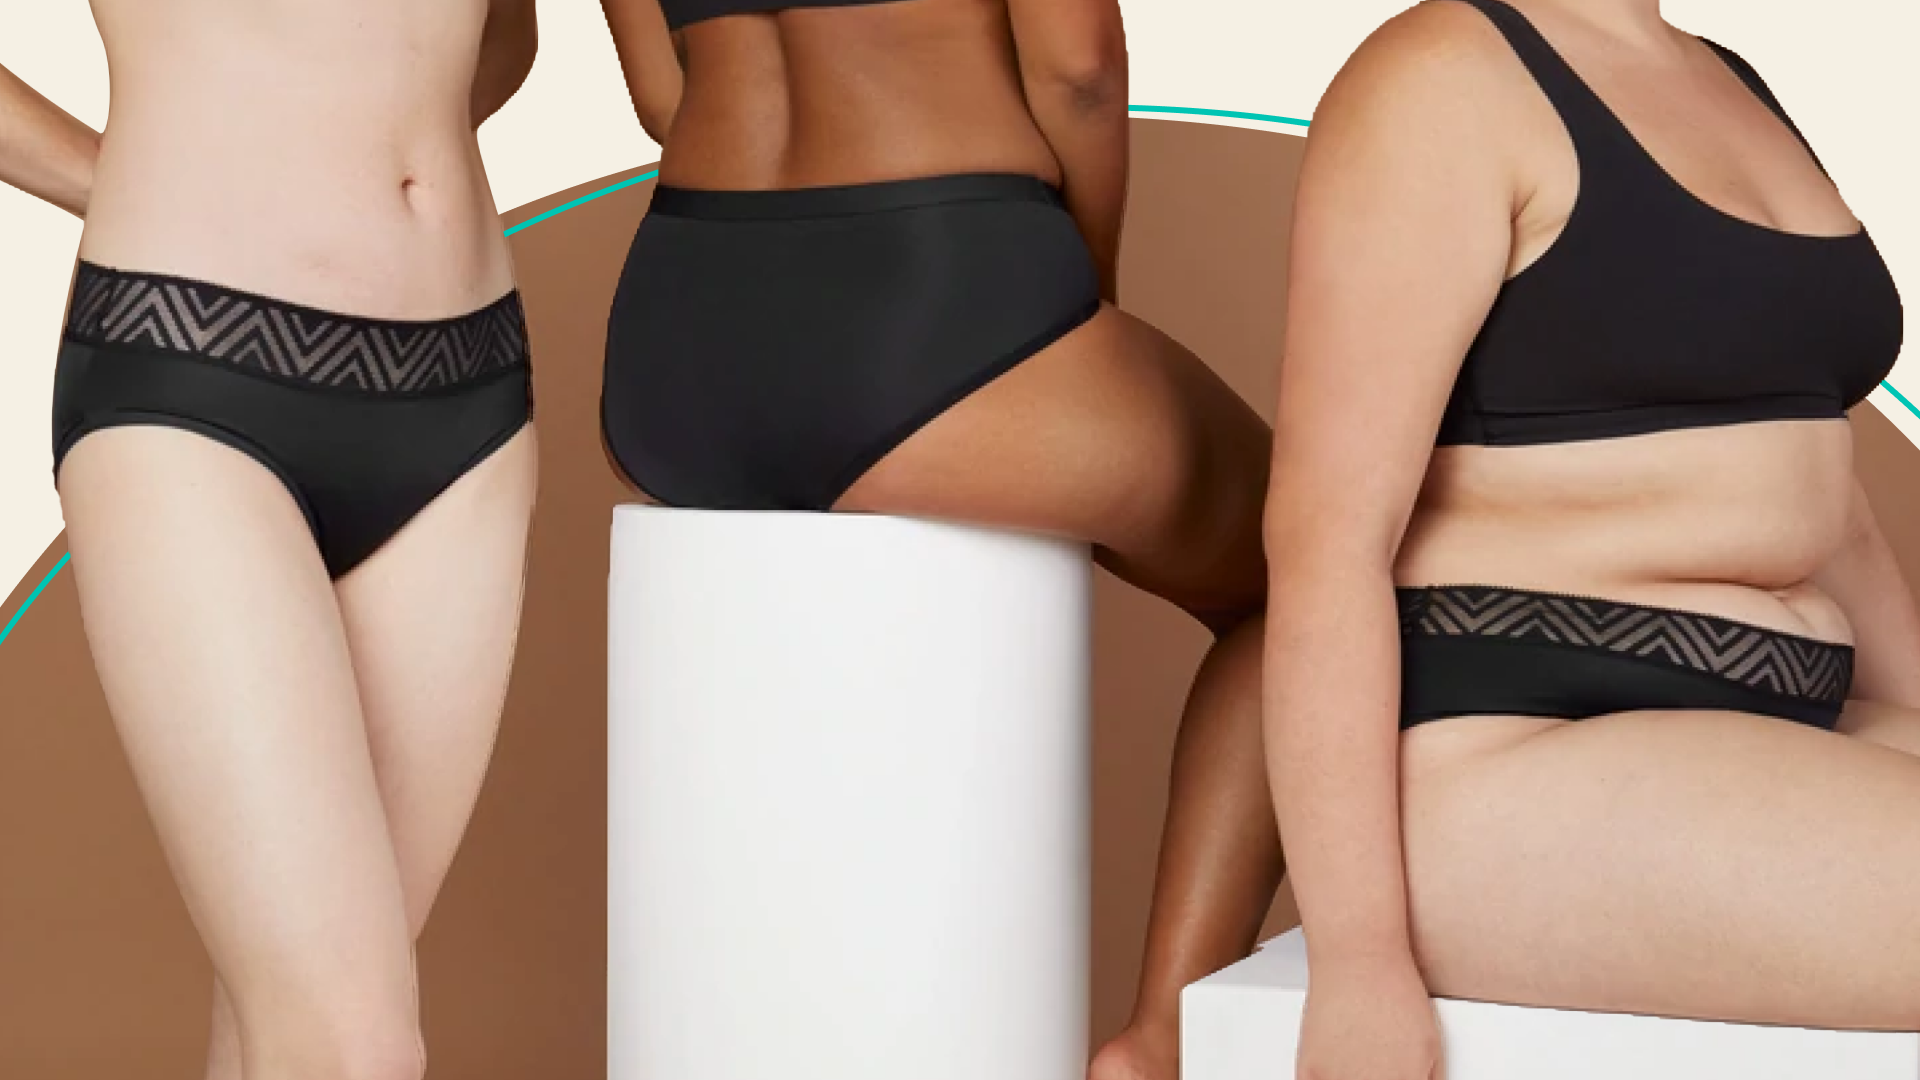 Menstrual panties made of cotton, pain-relieving, Wellness